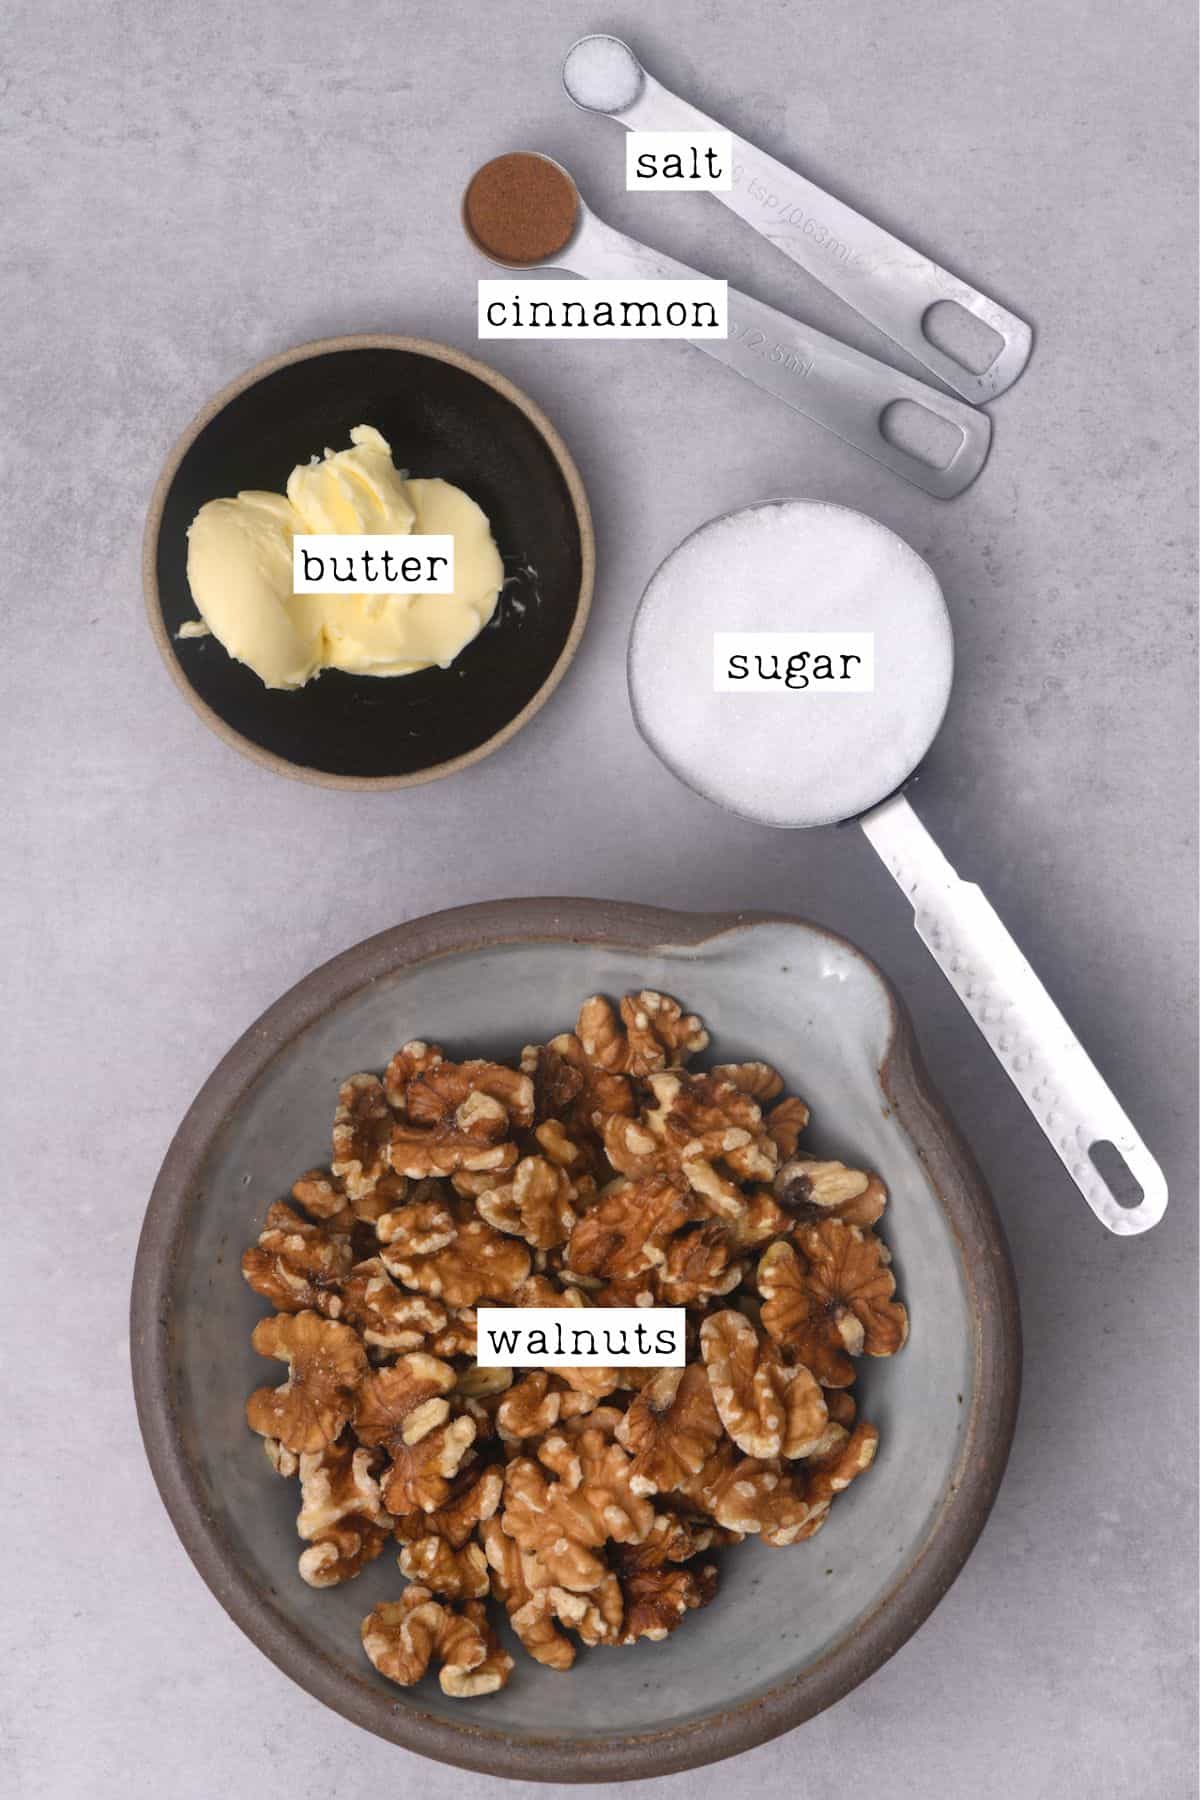 Ingredients for candied walnuts